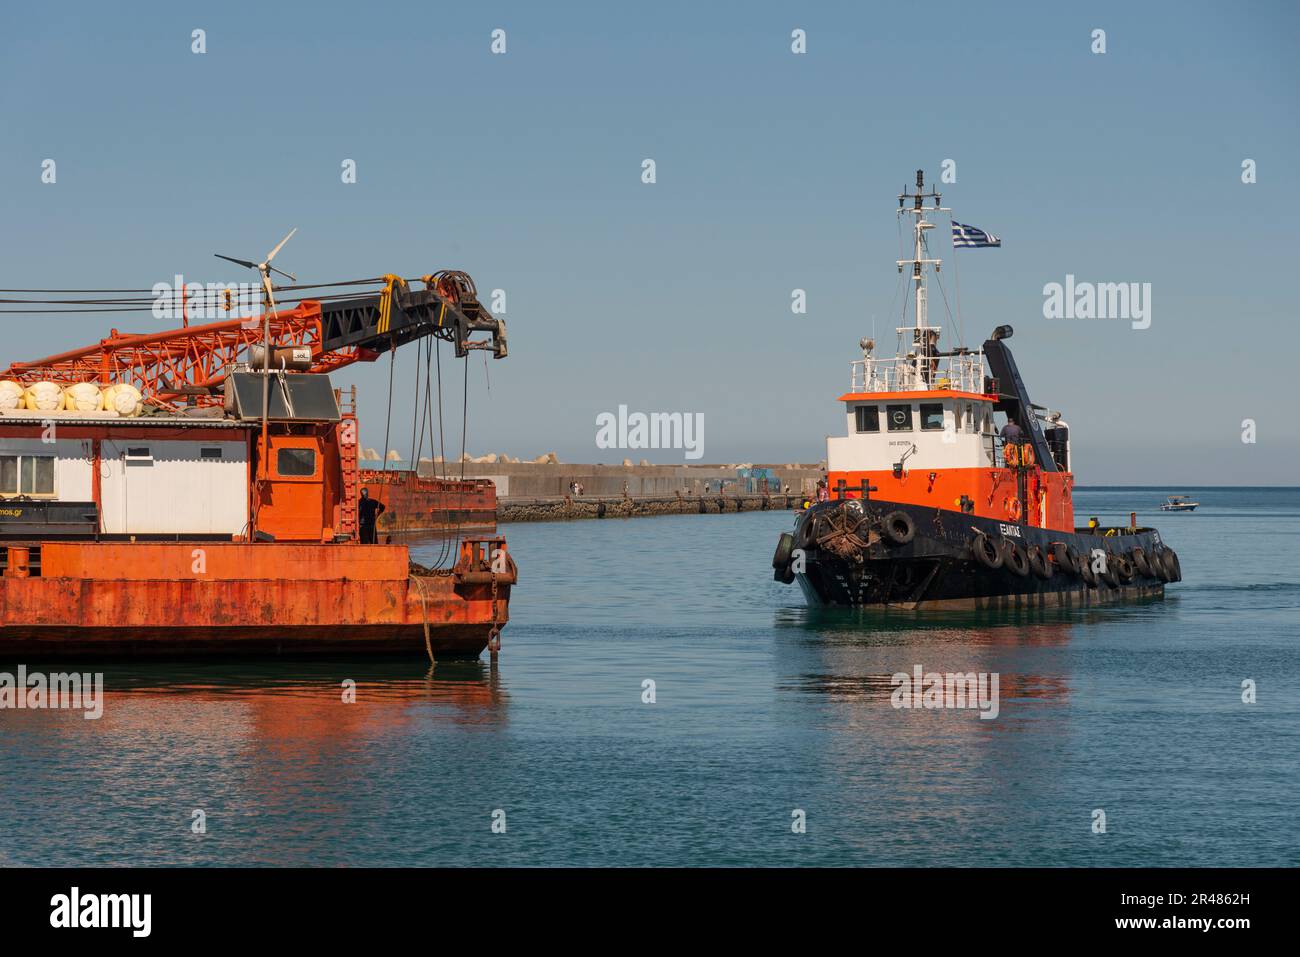 Heraklion, Crete, Greece. 2023. Tug approaching a large sea going crane  barge with a crane mounted on deck alongside the harbour. Stock Photo